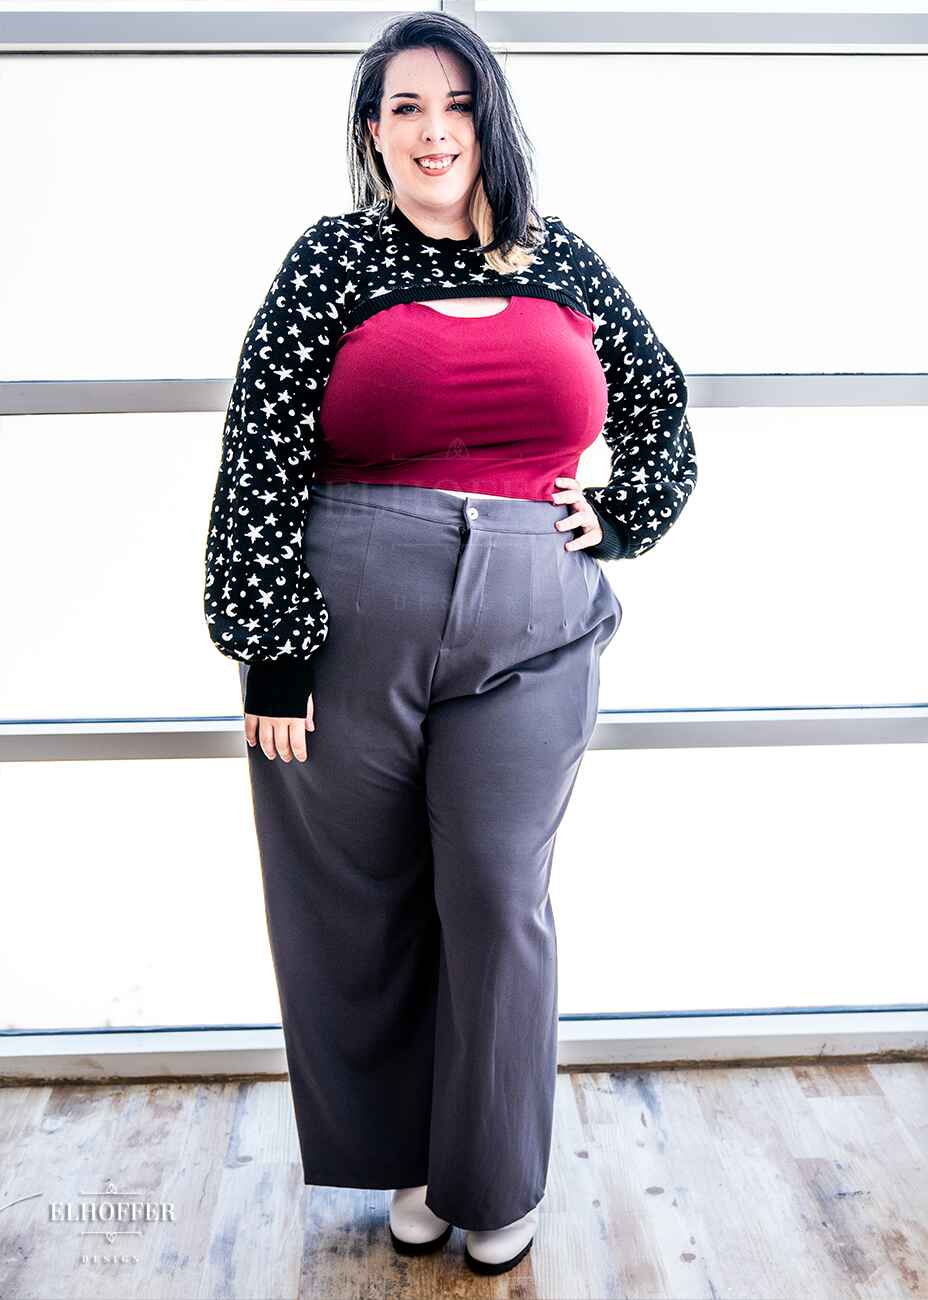 Katie Lynn, a fair skinned 2xl model with black and white hair, is wearing a black super cropped crew neck knit shrug sweater with a white star and moon pattern, long billowing sleeves, and thumbholes